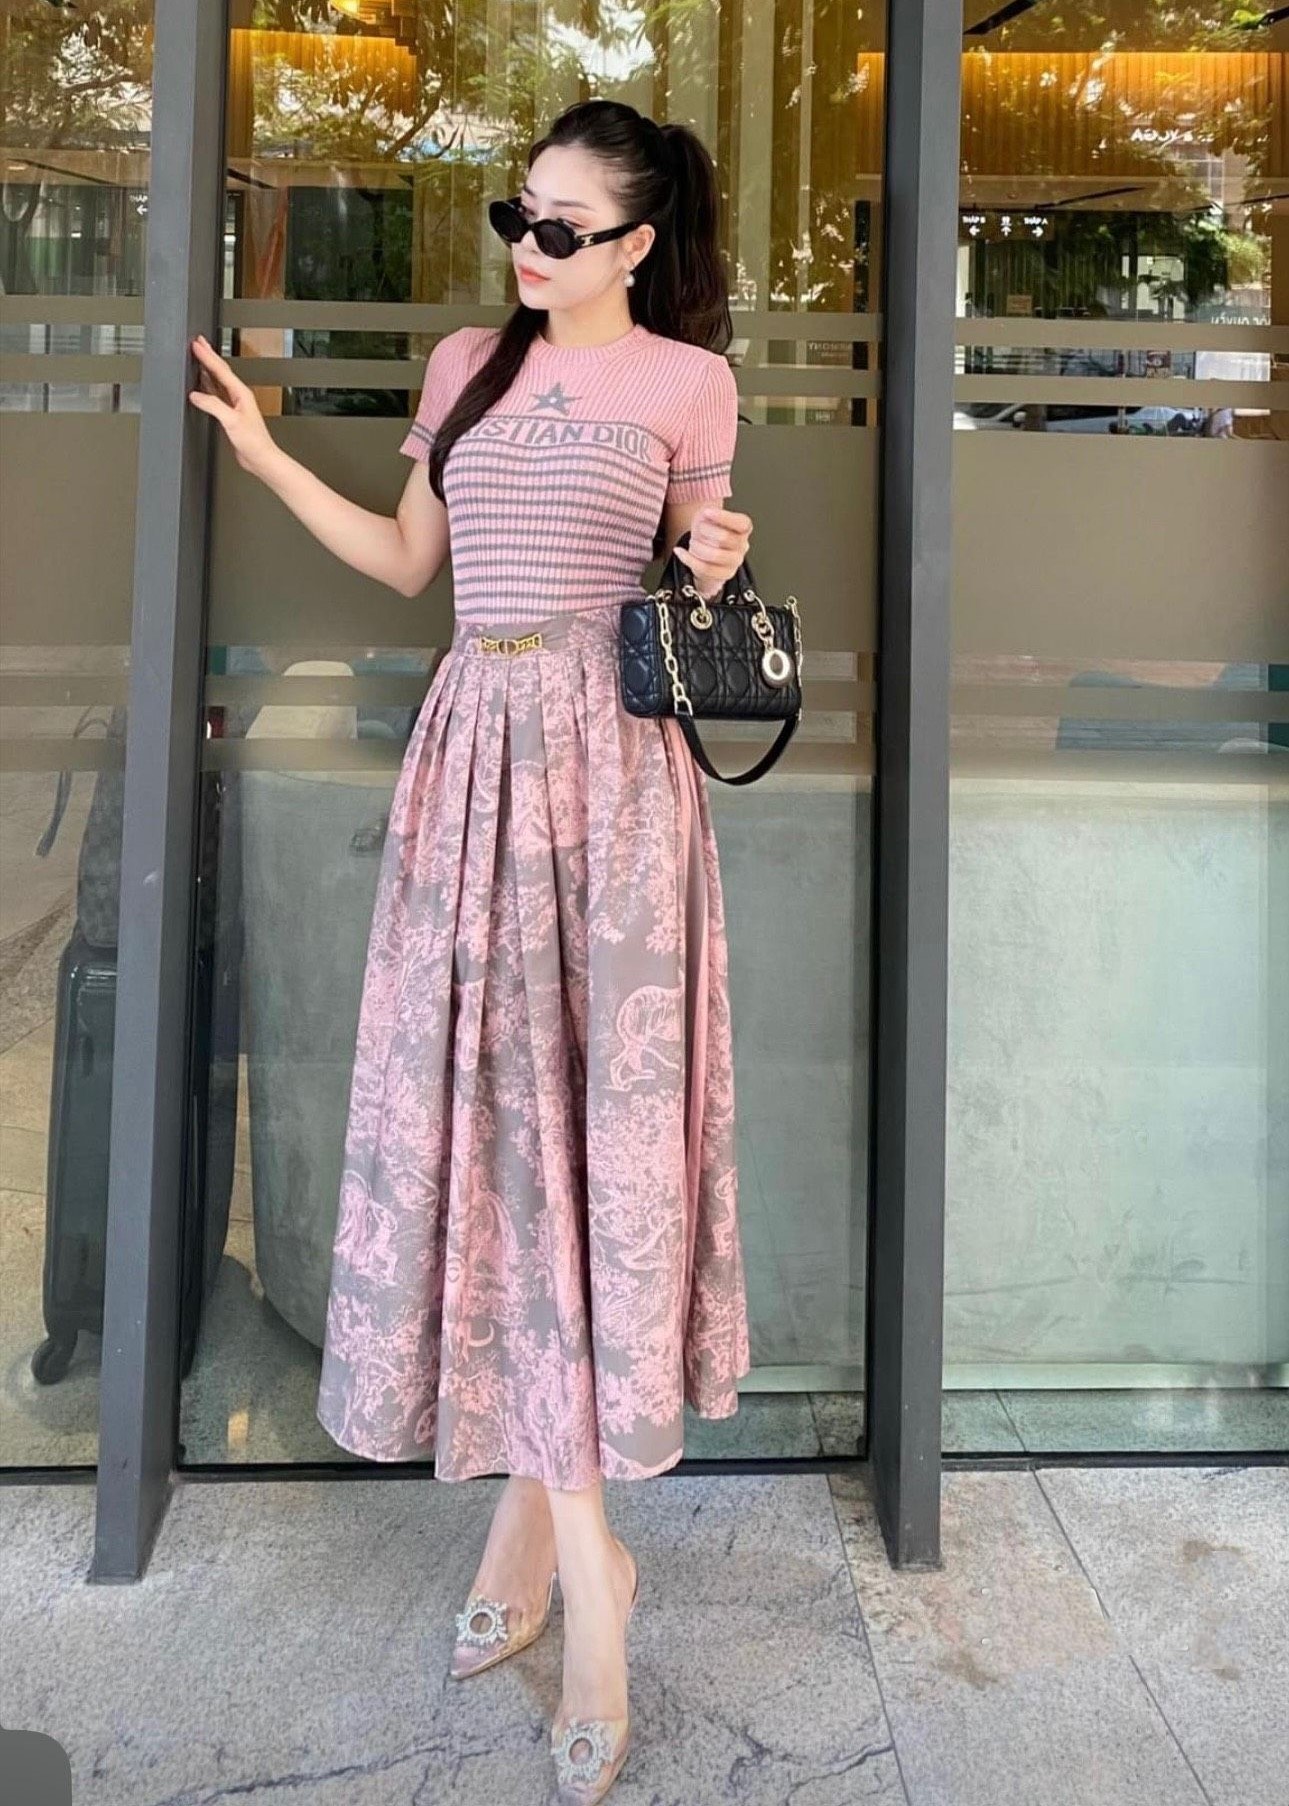 VÁY NỮ DÀI DIORIVIERA FLARED SKIRT GRAY AND PINK COTTON MUSLIN WITH TOILE DE JOUY REVERSE MOTIF 1